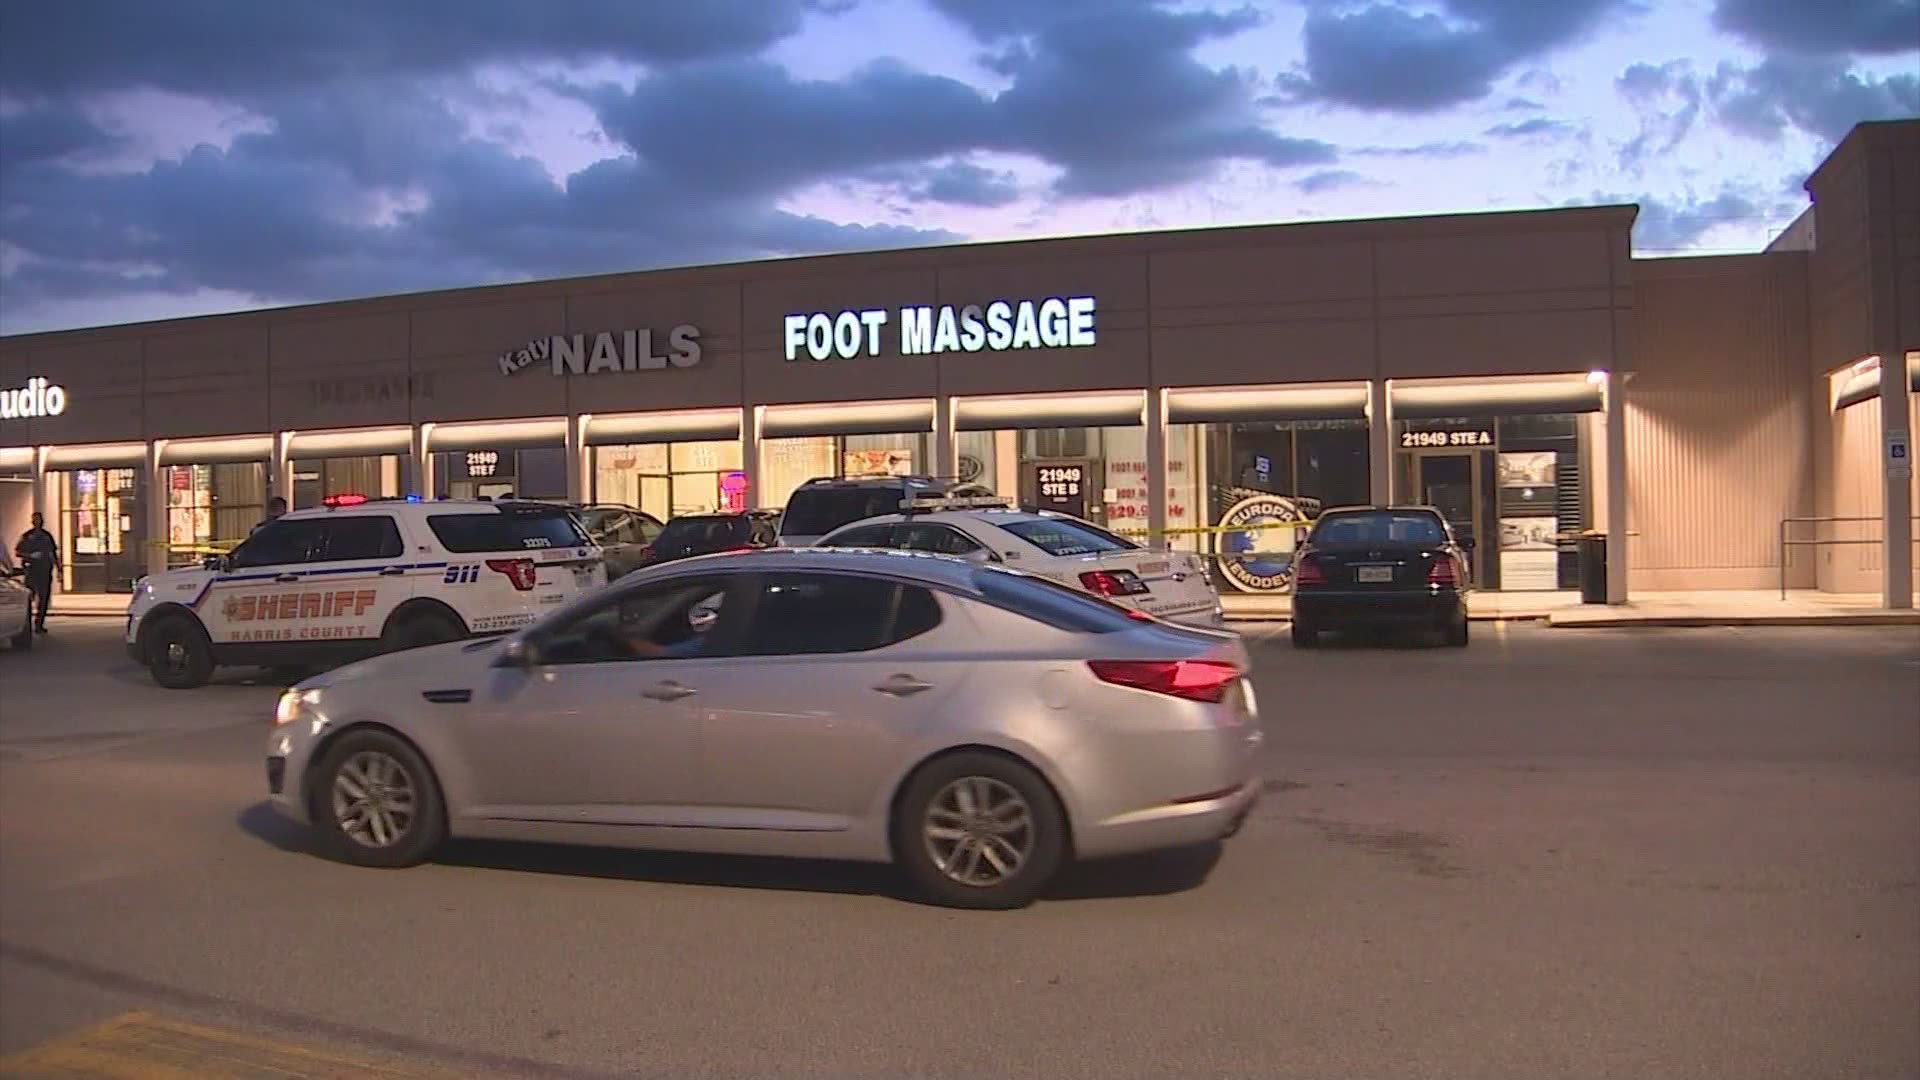 The manager of a nail salon was shot Saturday after a confrontation over a bill, according to investigators.